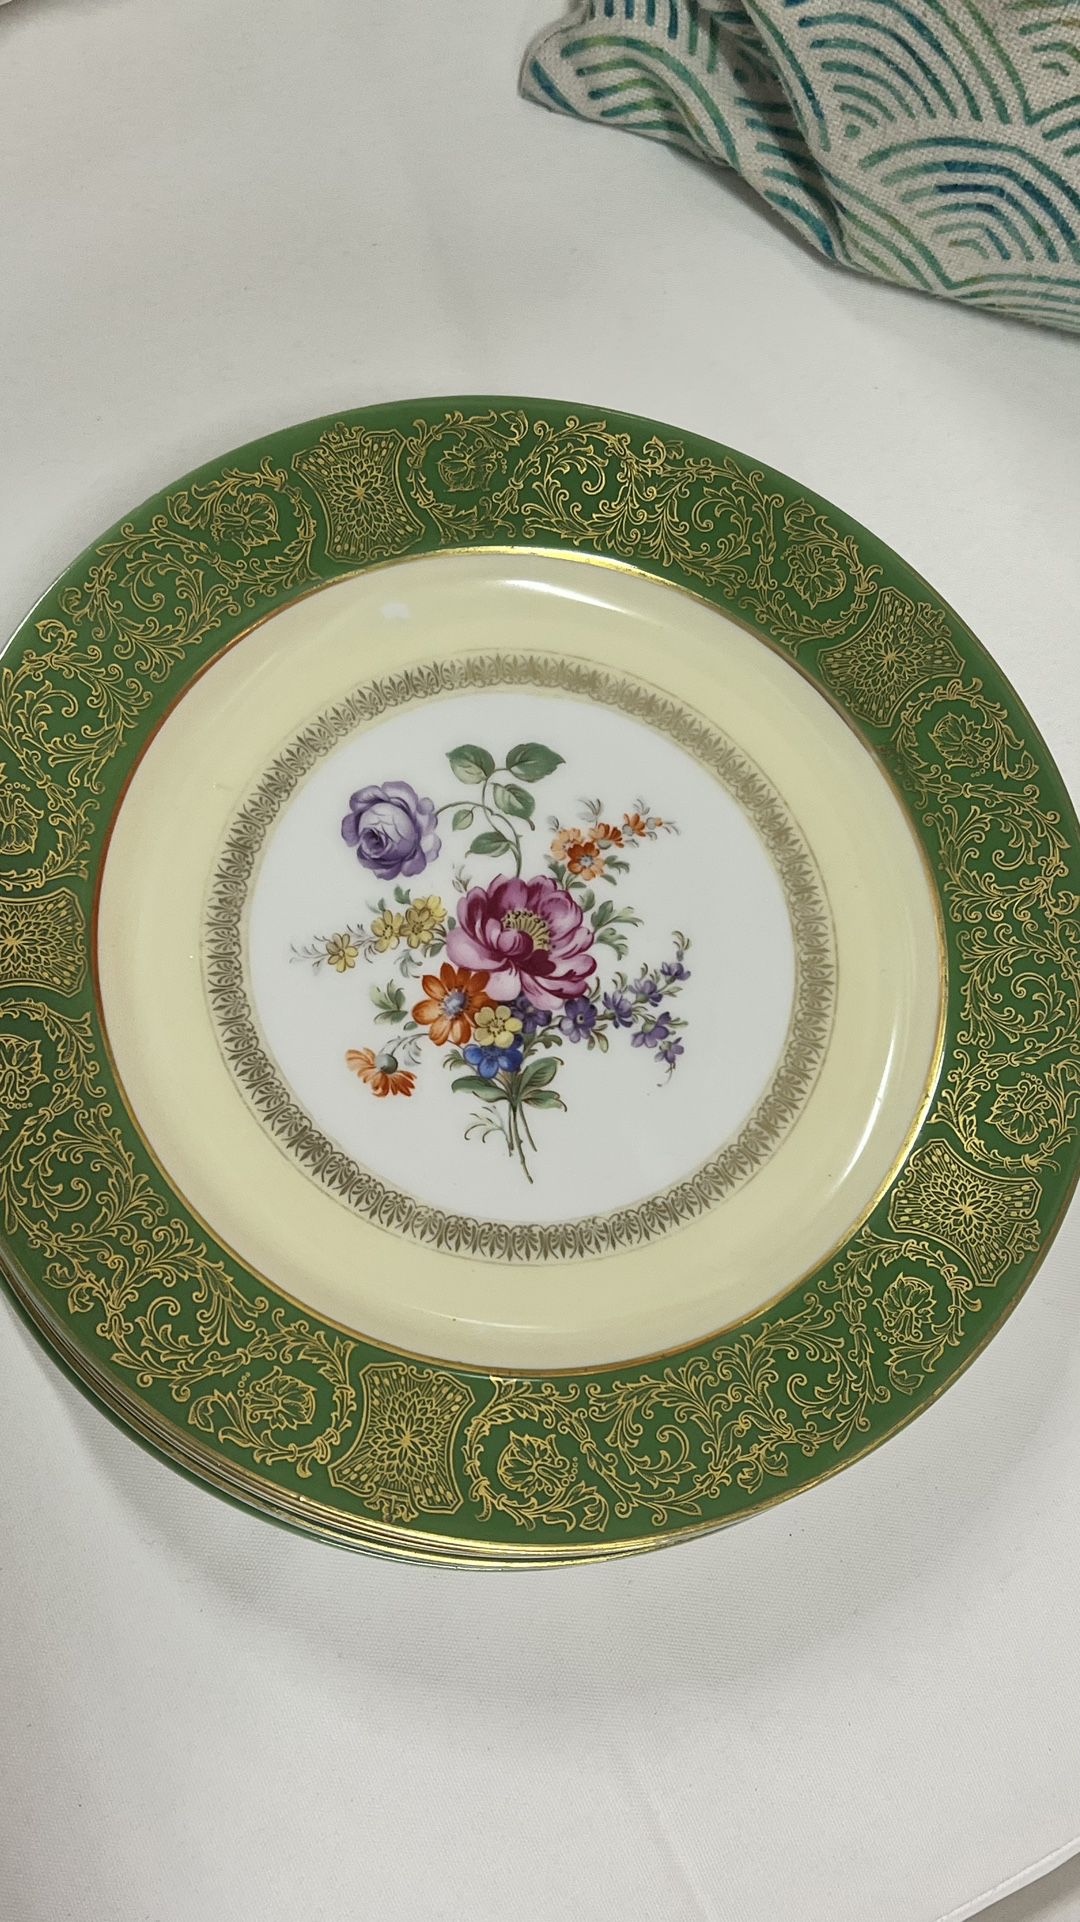 Beautiful antique green plates, decorated with floral and green and beige detailing